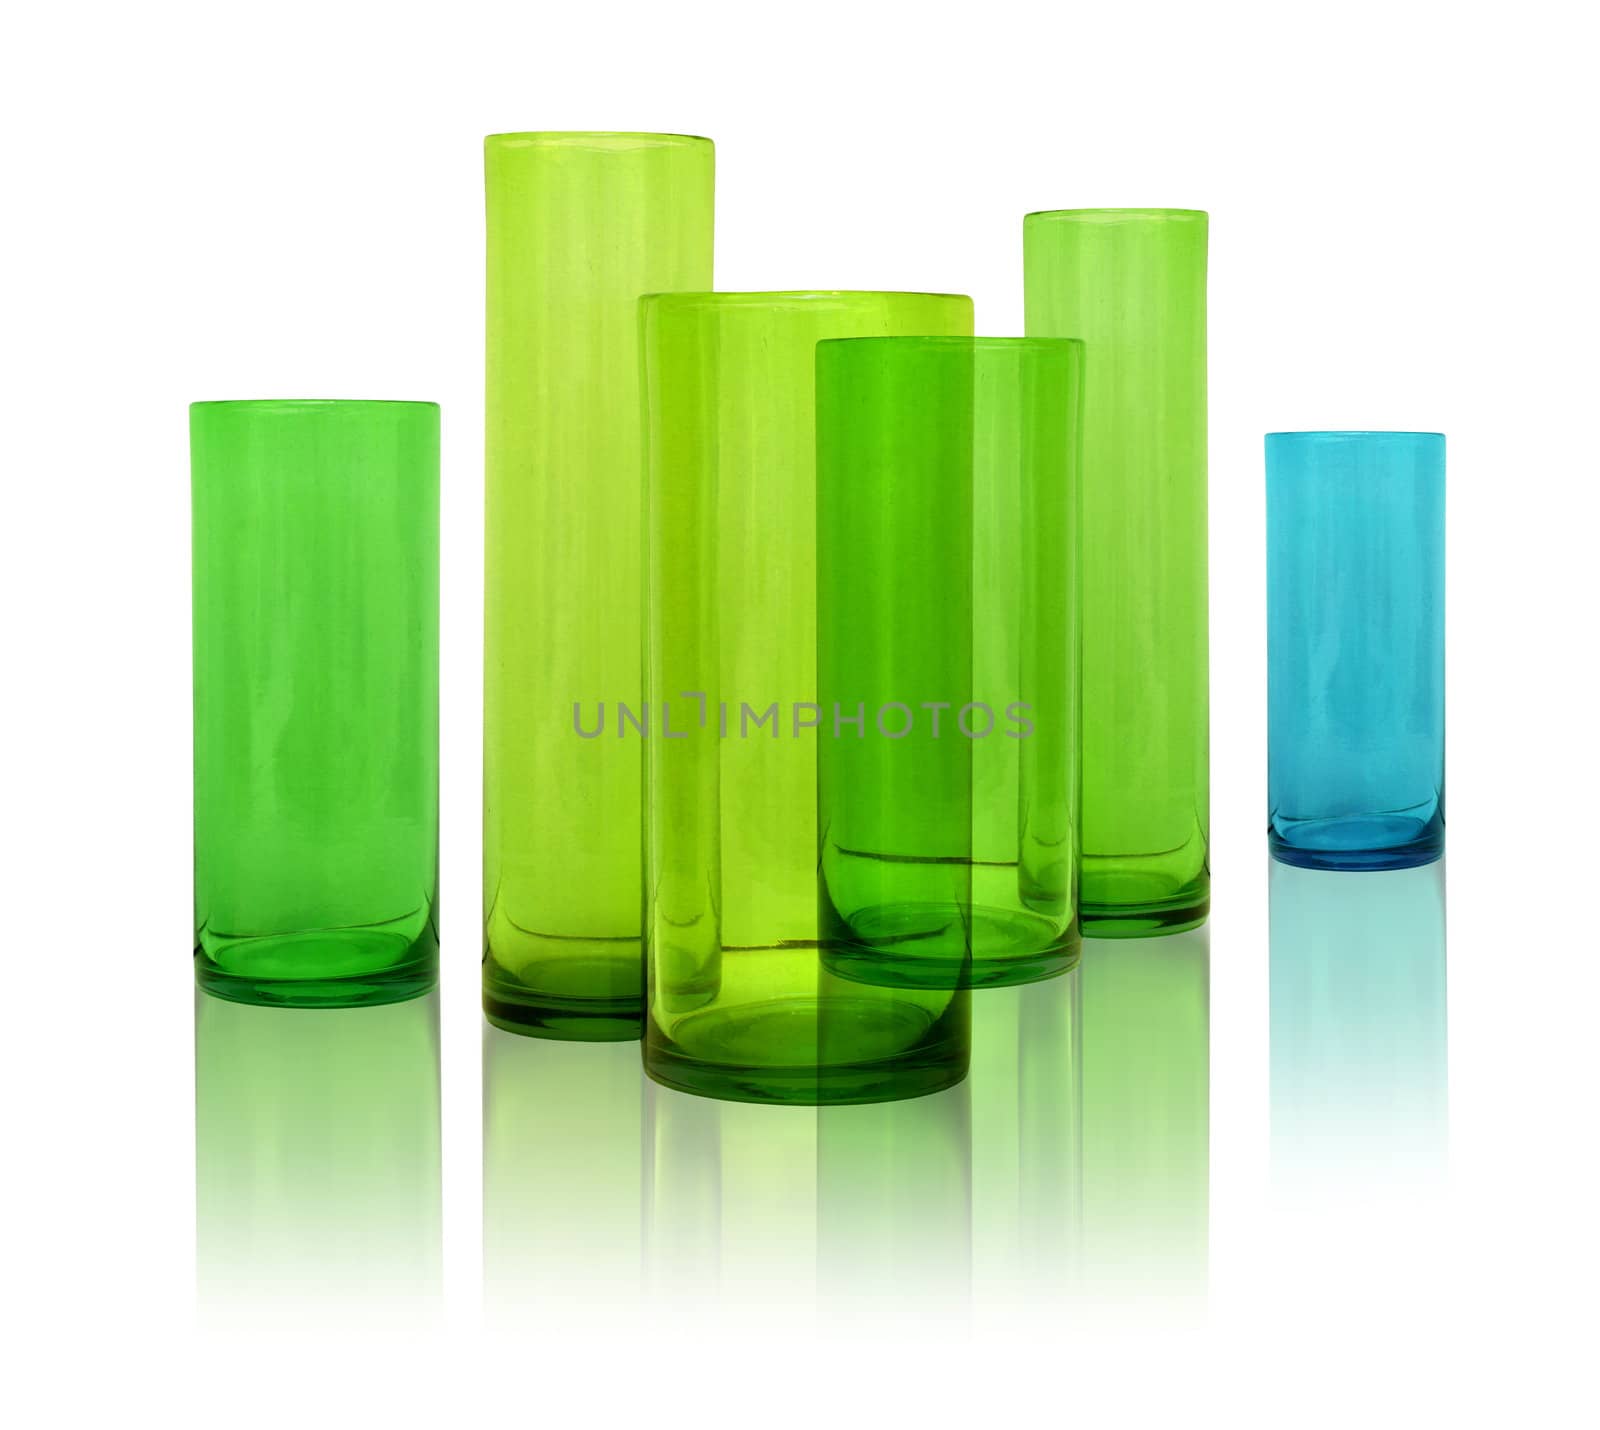 Modern colored glass vases row on white reflective background